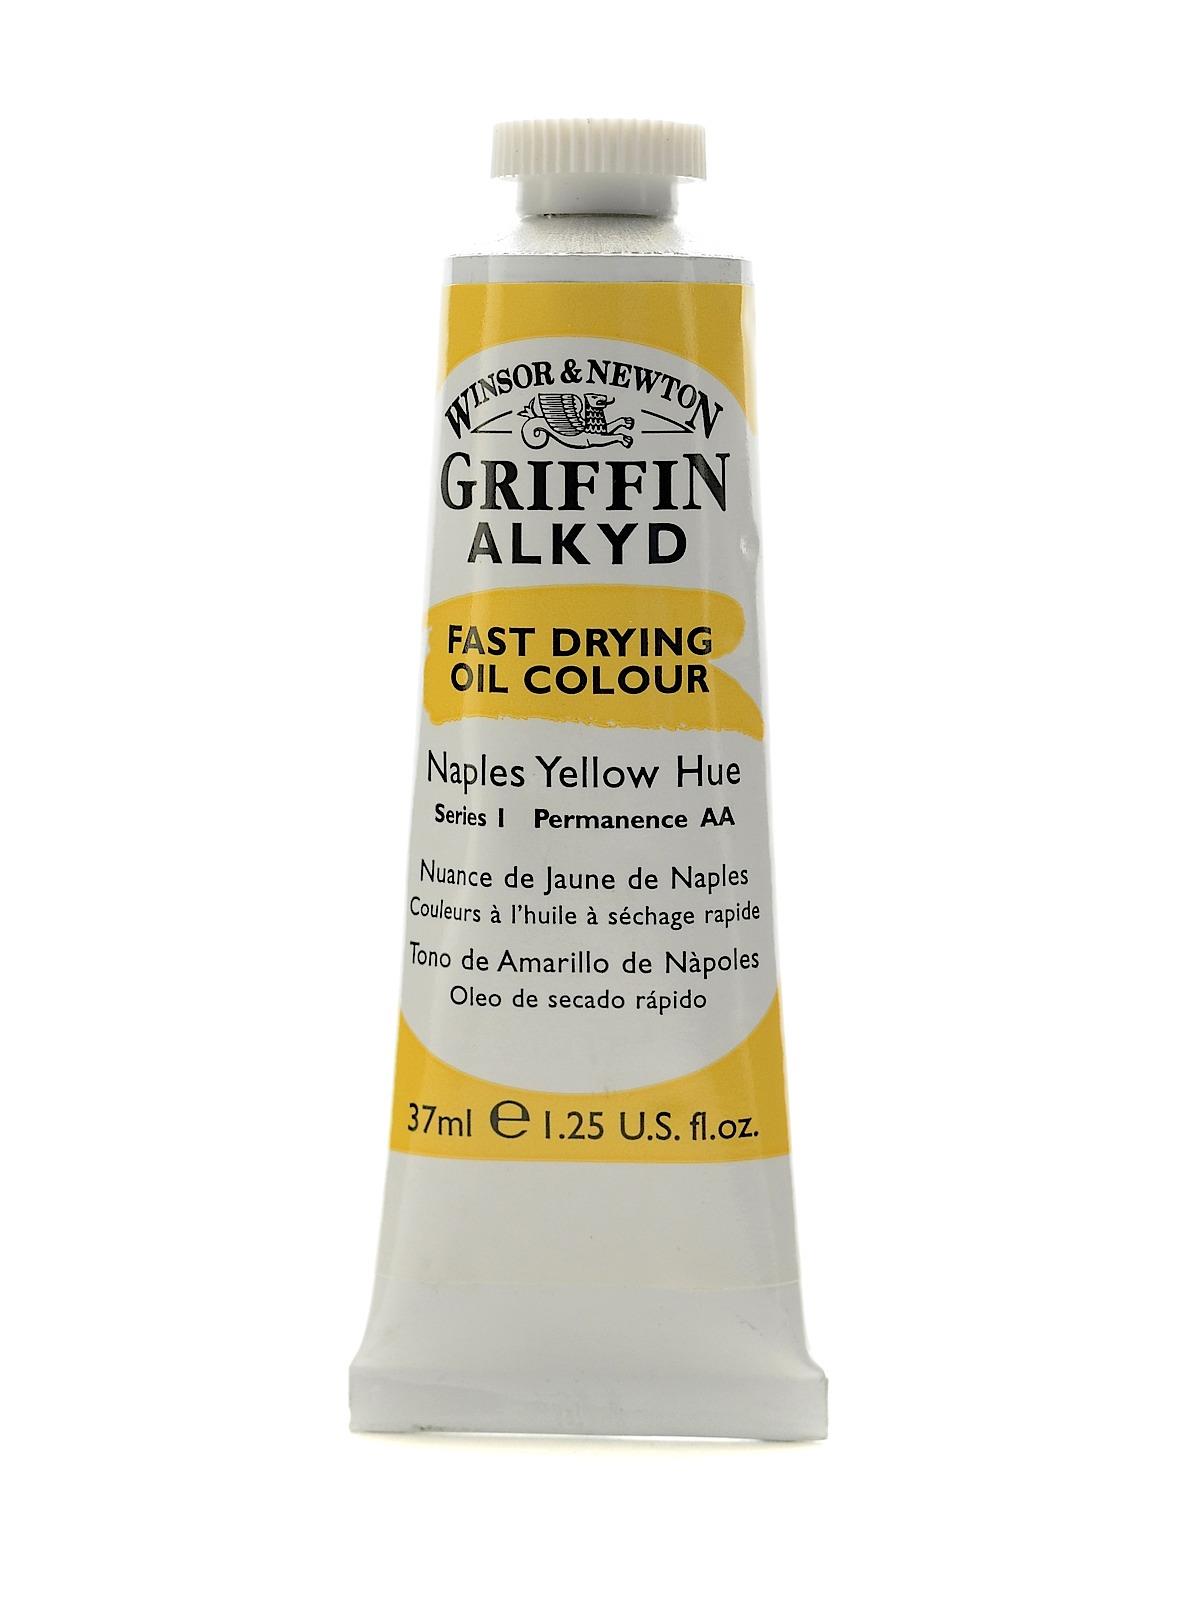 Winsor & Newton Griffin Alkyd Oil Colours Winsor red 37 ml 726 [Pack of 3]